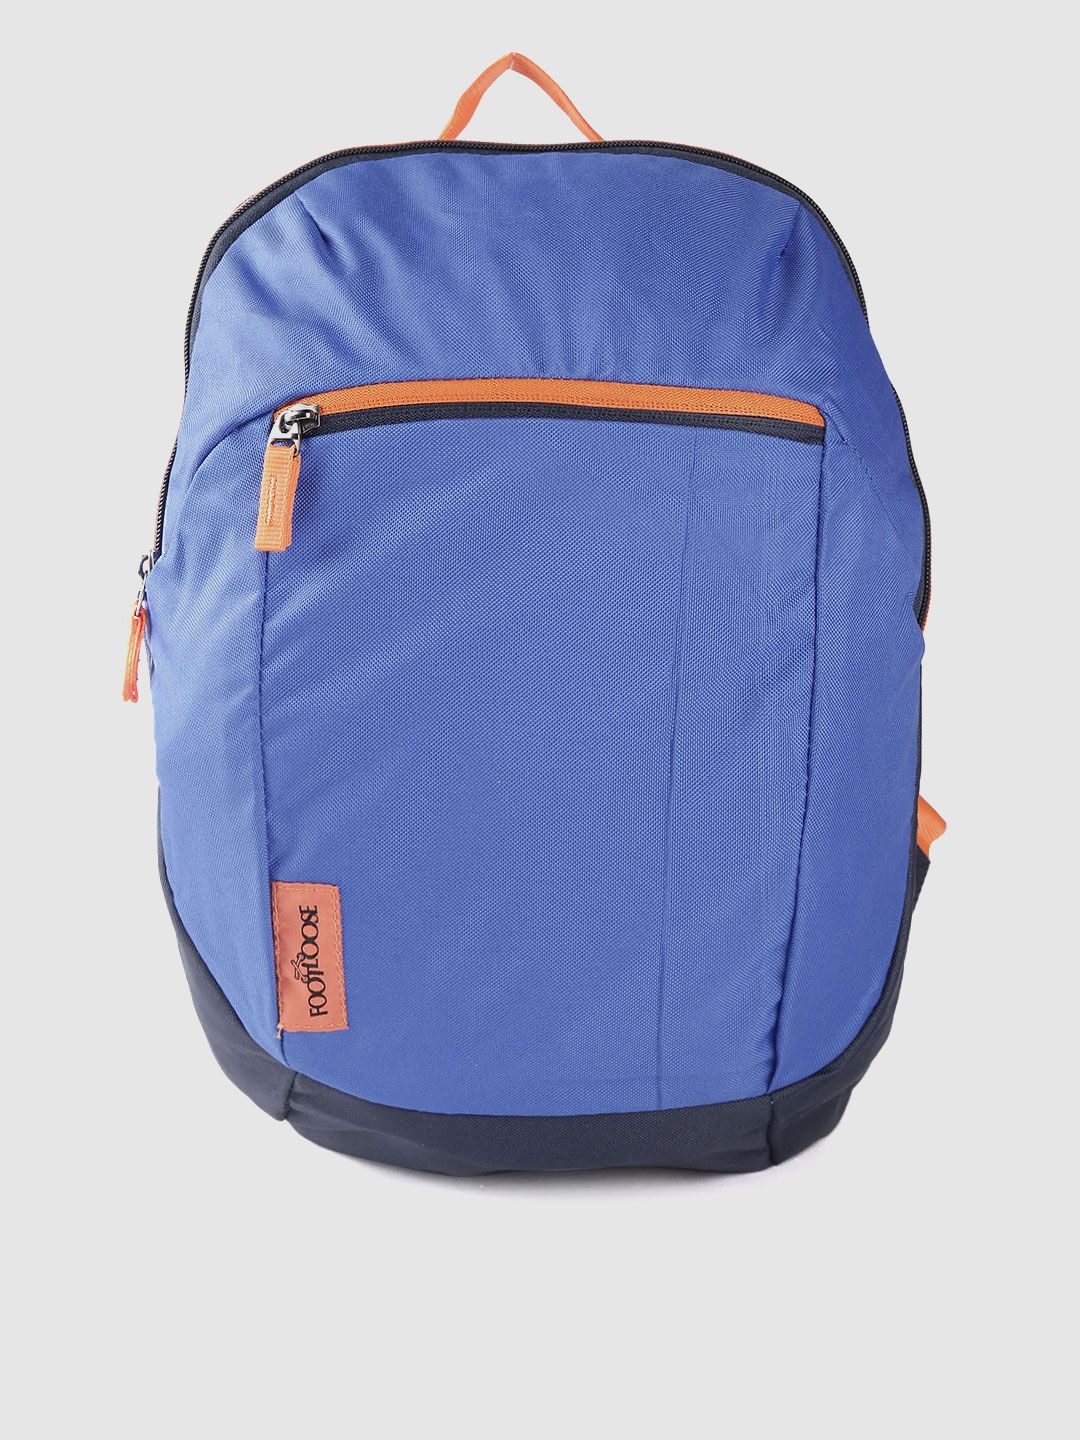 Footloose Unisex Blue Solid Backpack Price in India